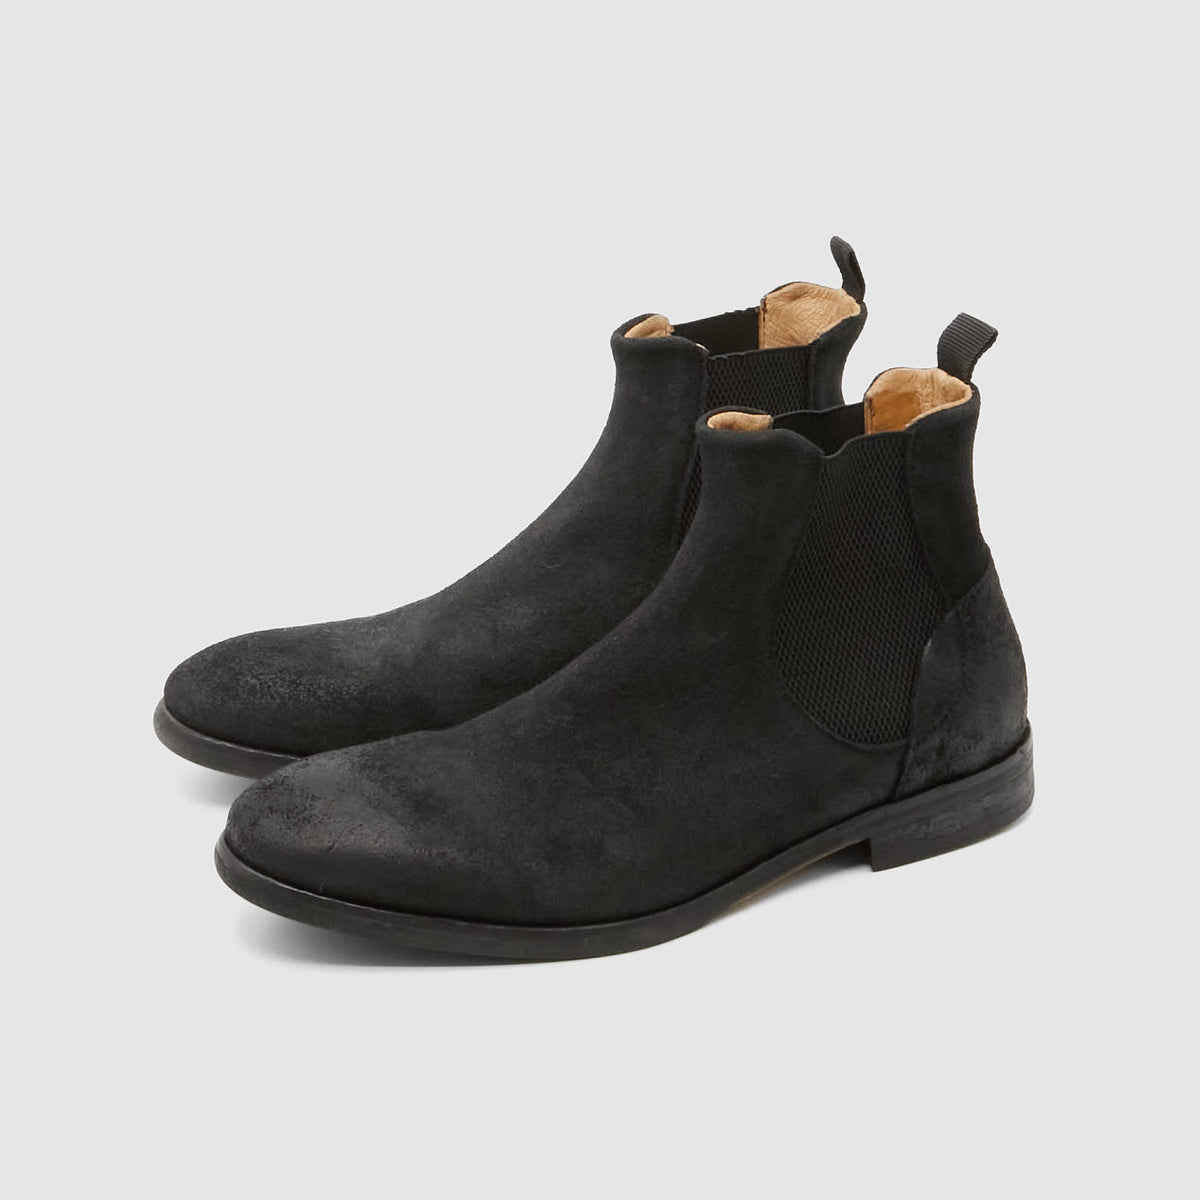 Hudson London Watchley Roughout Leather Chelsea Boot